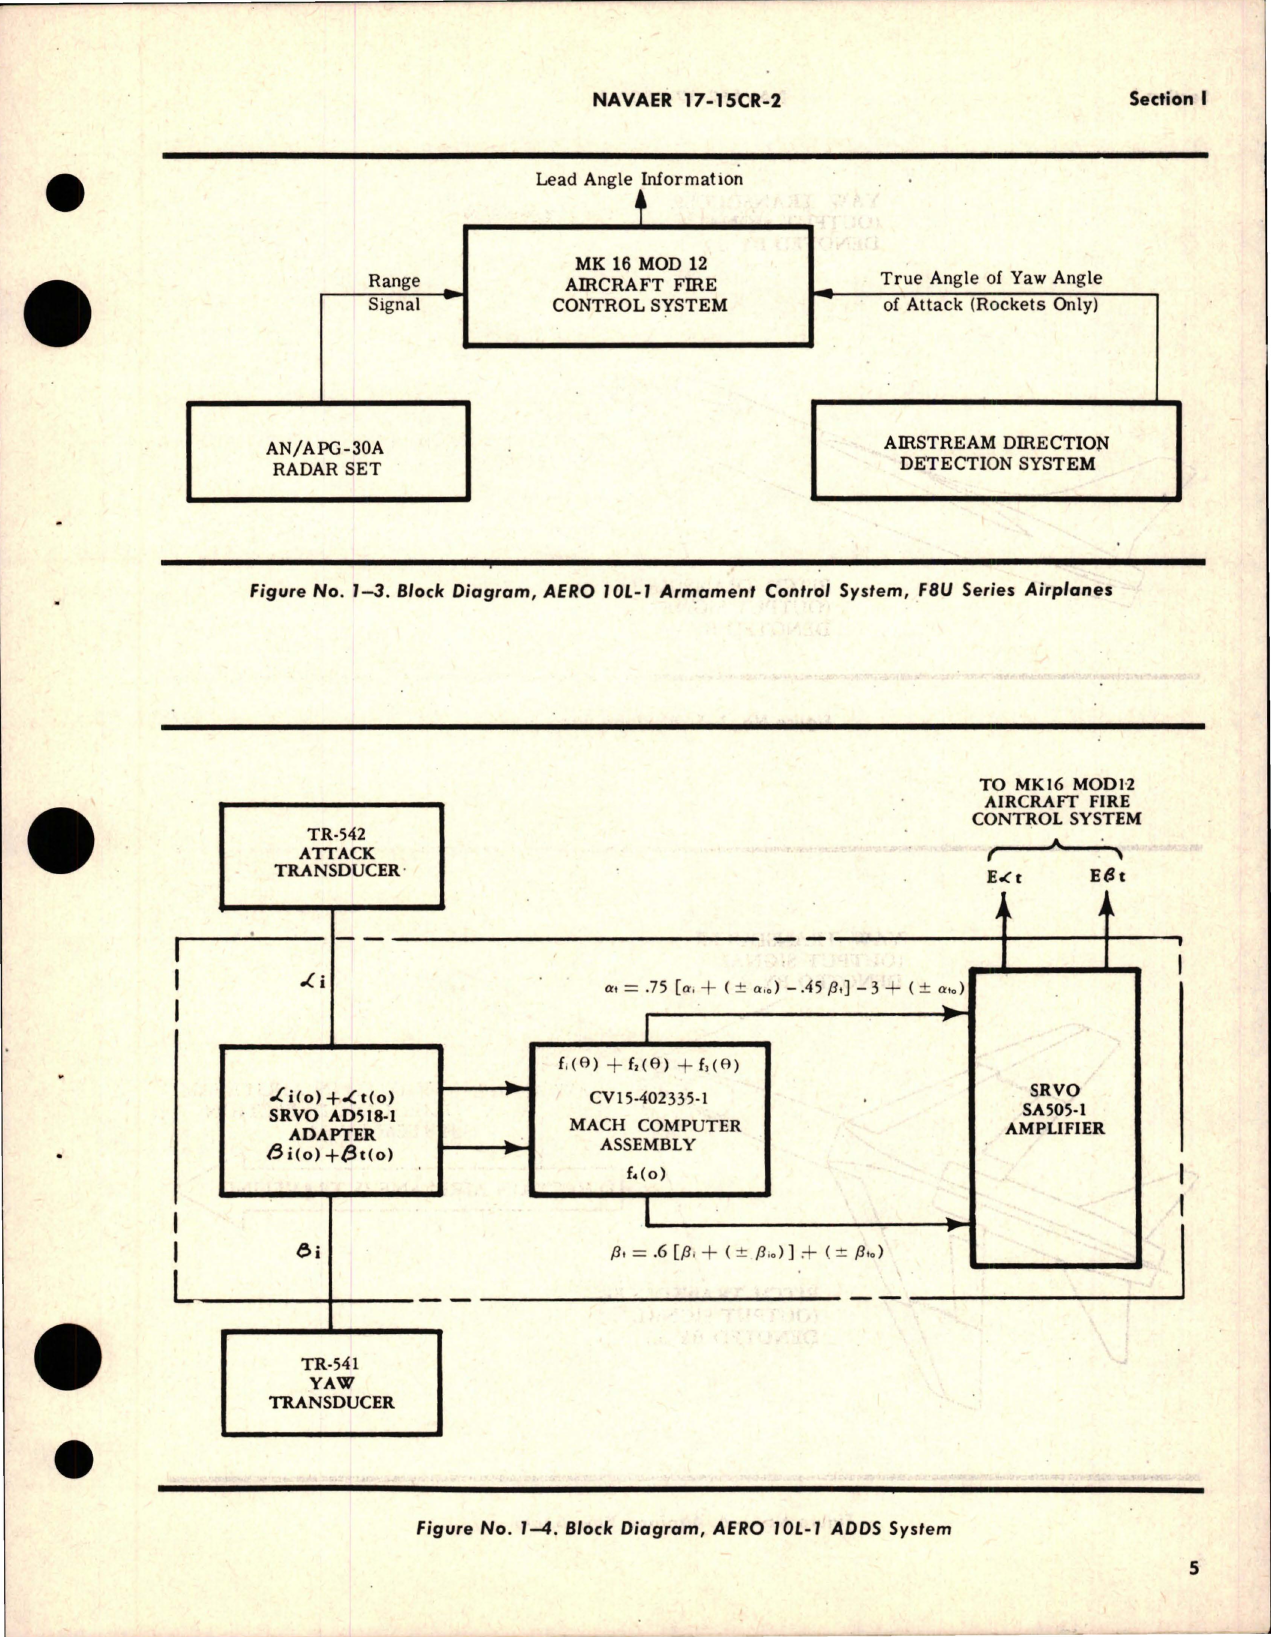 Sample page 9 from AirCorps Library document: Operation and Service Instructions with Illustrated Parts for Airstream Directional Detection System Flight Line Test Sets - CV15-206440-1, CV15-206440-4